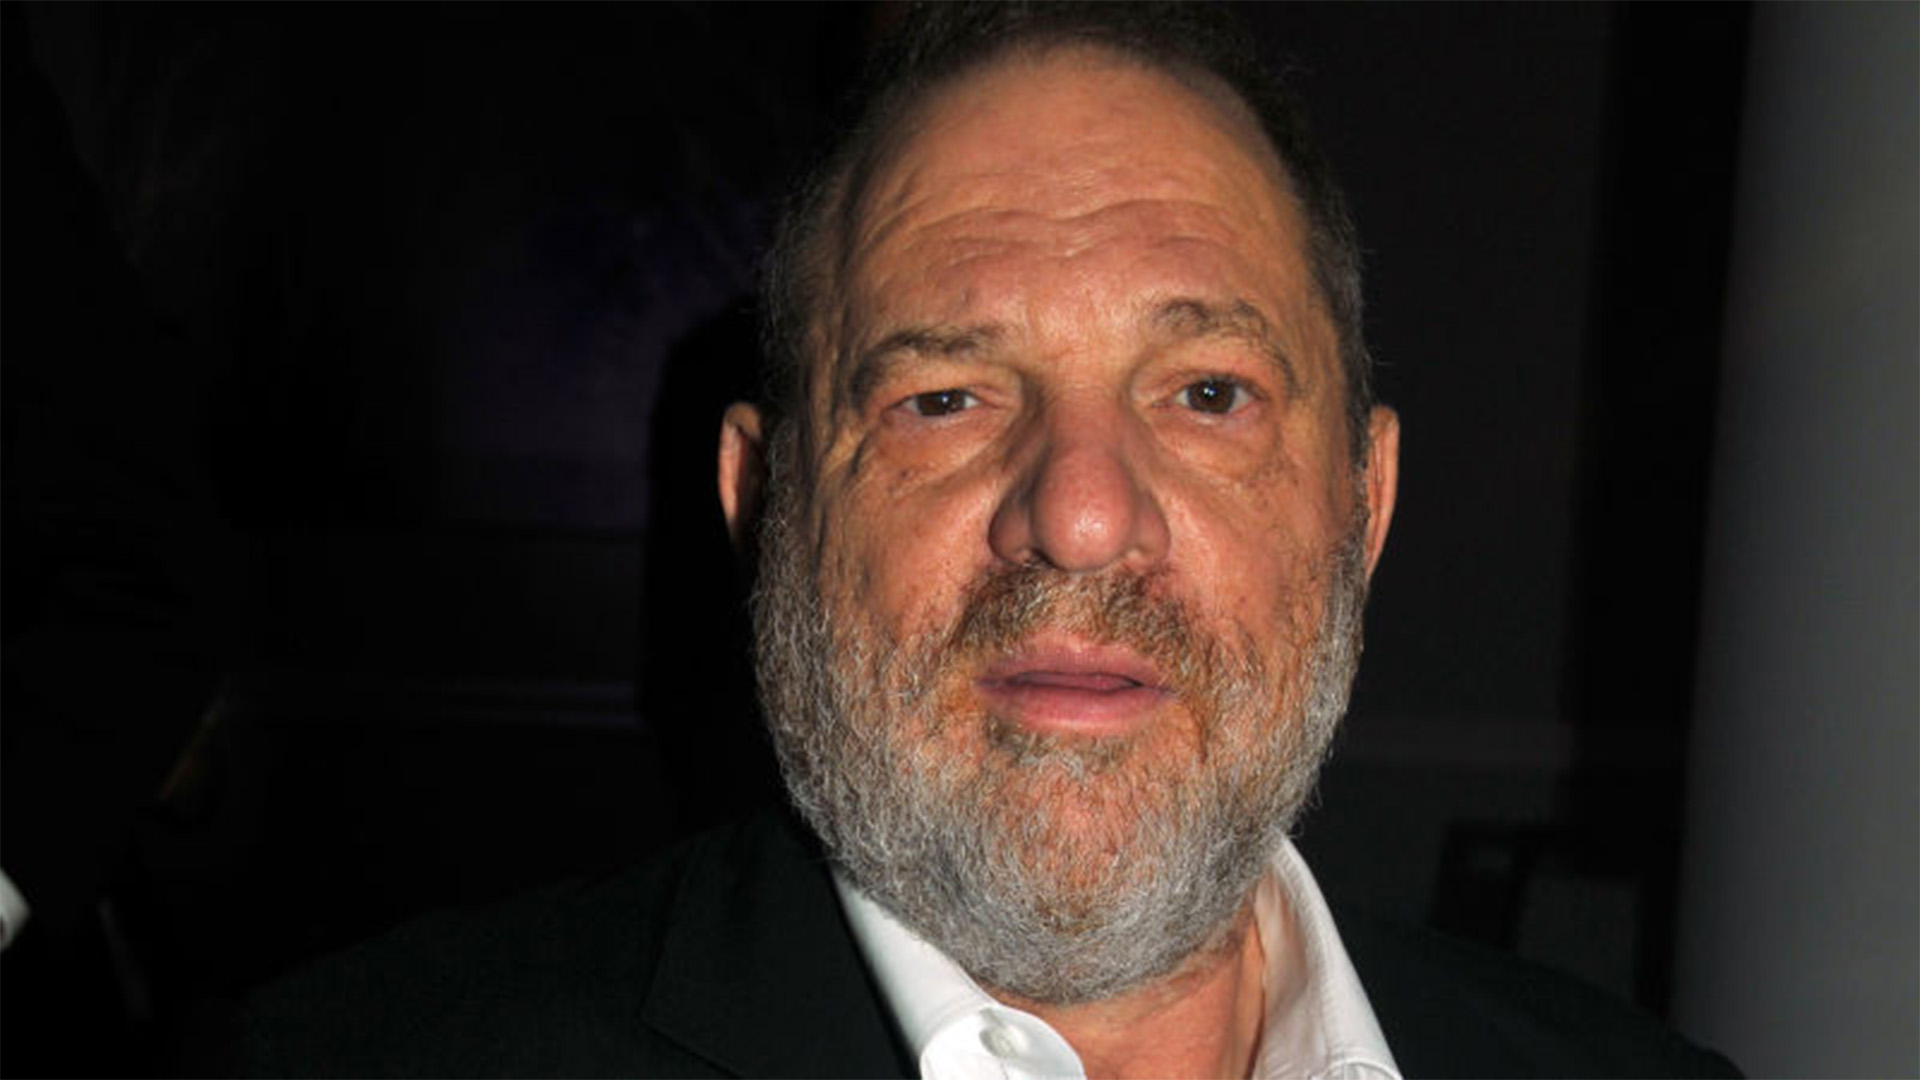 Decades Of Sexual Harassment Accusations Against Harvey Weinstein